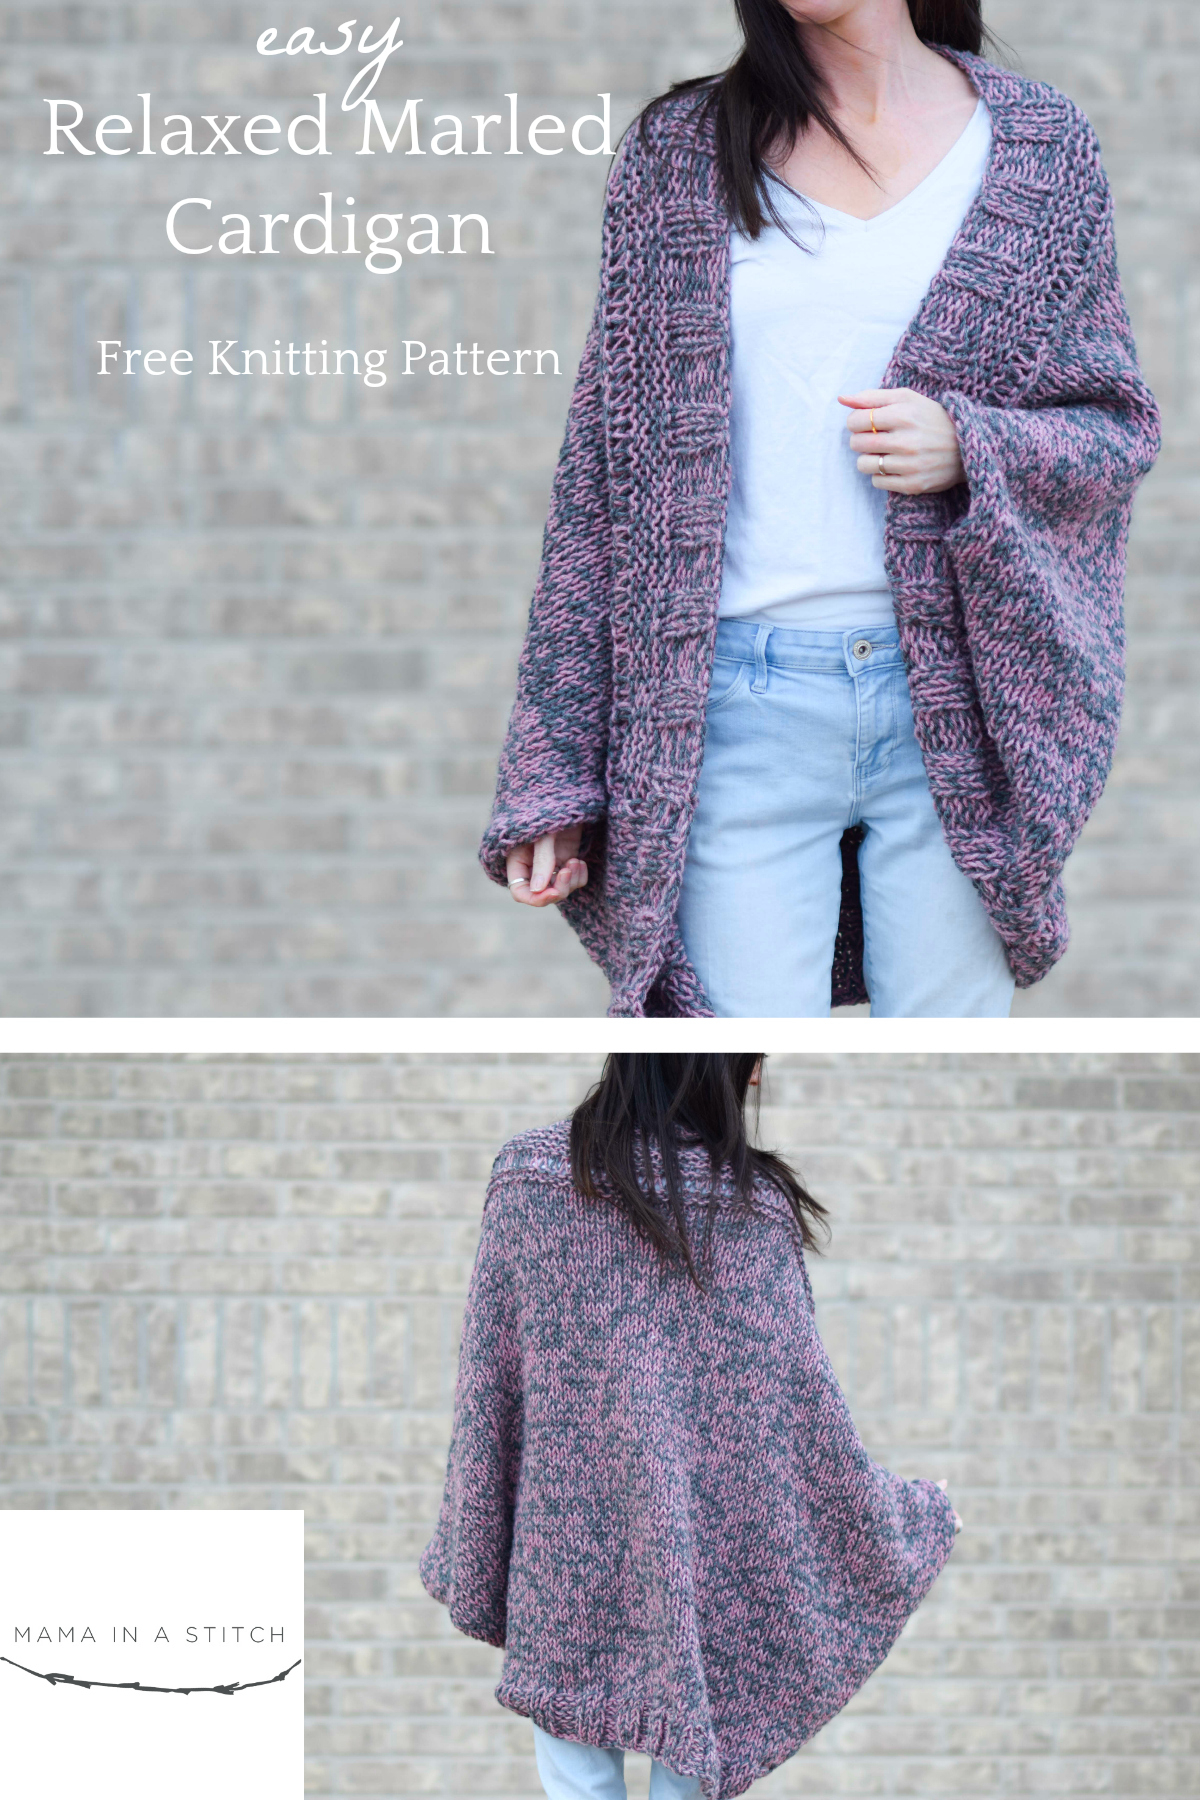 Free Cardigan Knitting Pattern Easy Relaxed Marled Cardigan Knitting Pattern Mama In A Stitch